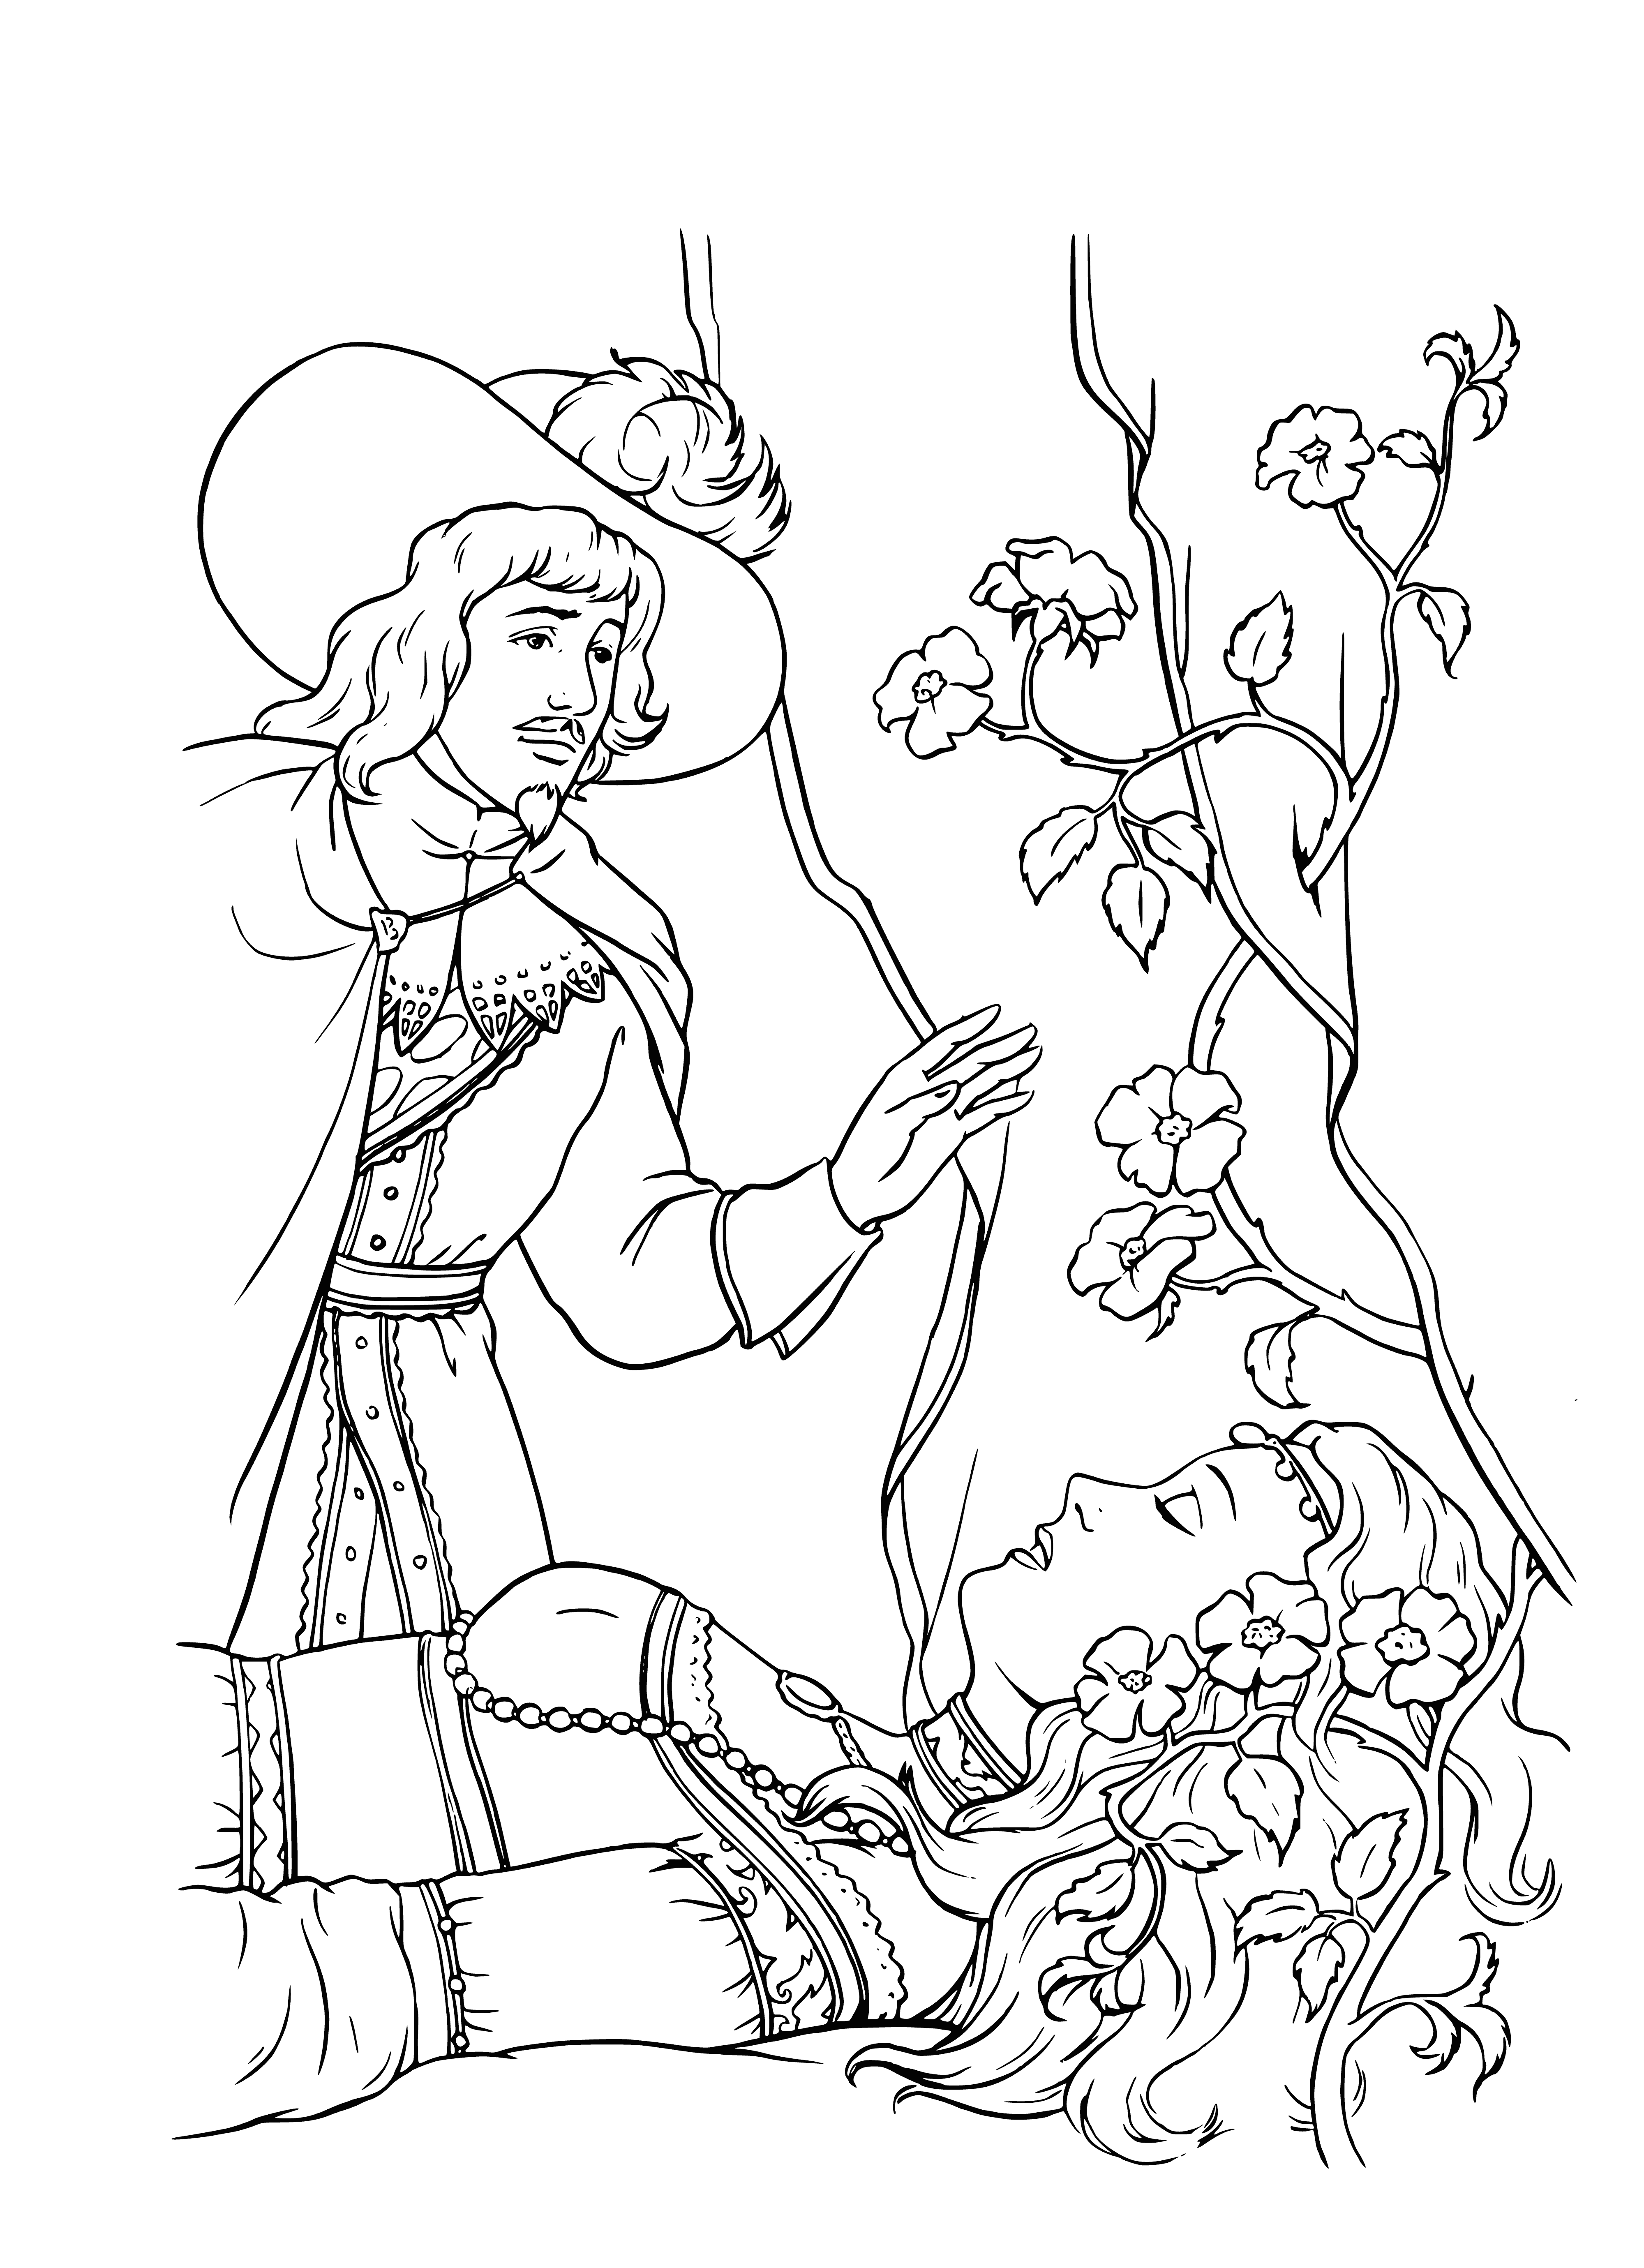 coloring page: A prince and princess fall in love but can't marry. On their wedding night, they spend one night together before the princess's true nature is revealed and they part ways forever.